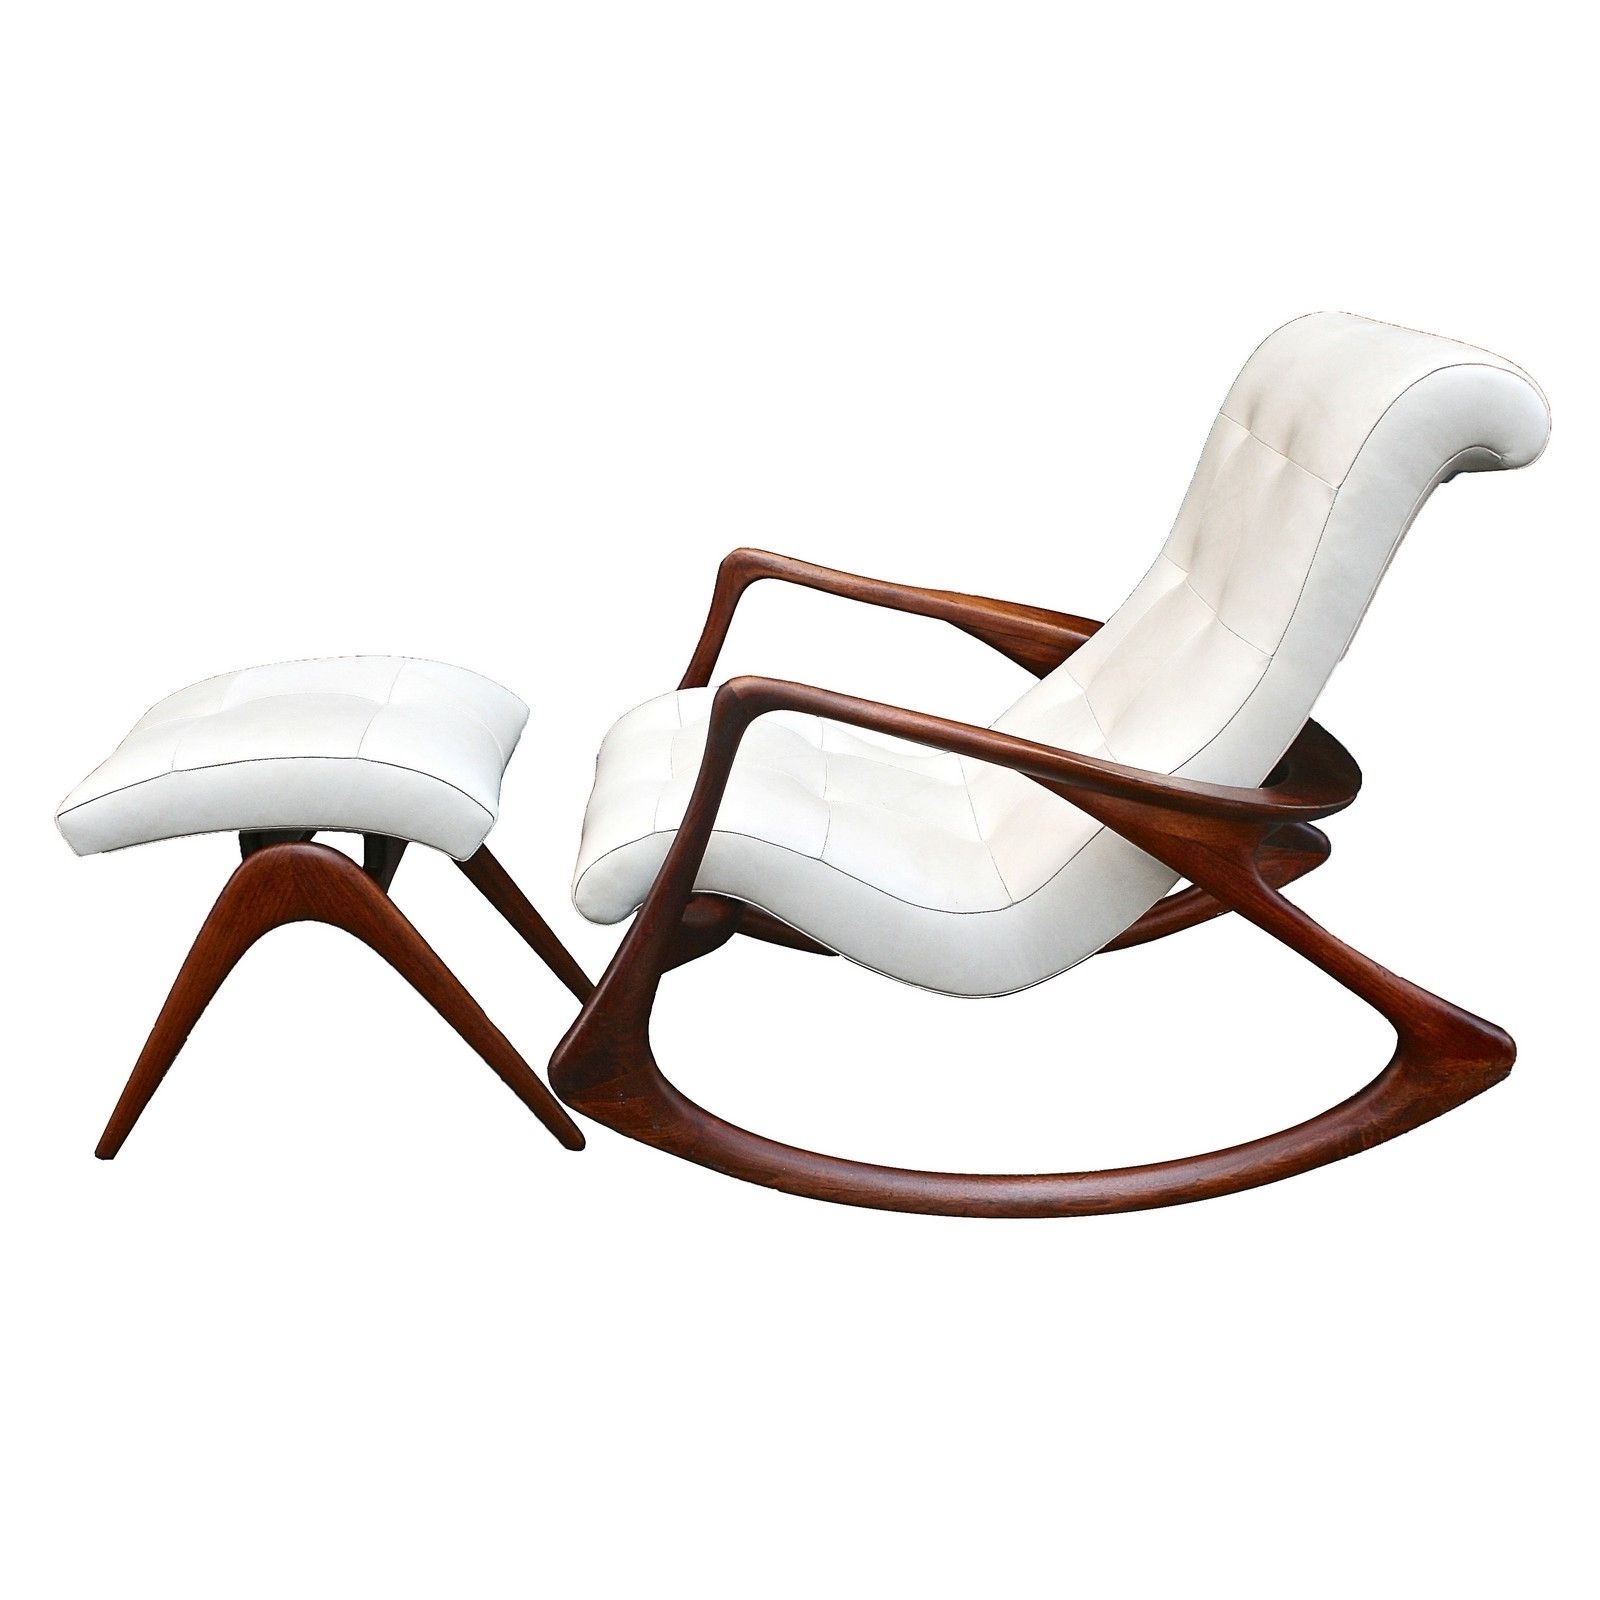 Patio Rocking Chairs With Ottoman Regarding Popular Contemporary Rocking Chair With Ottoman (View 16 of 20)